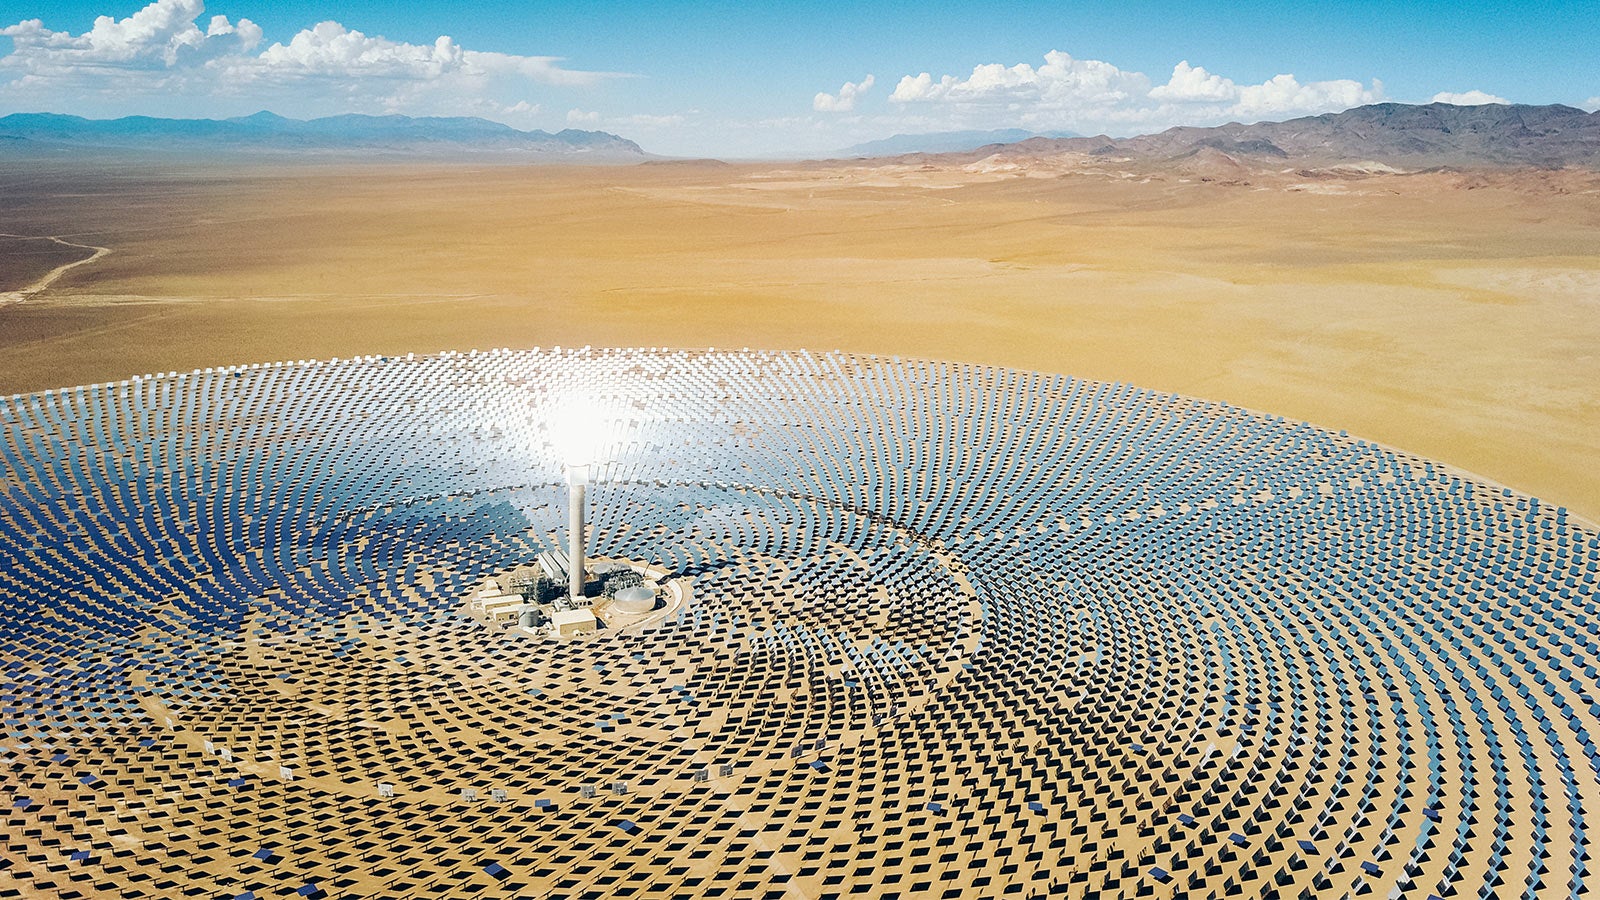 The Ivanpah Solar Electric Generating System is a concentrated solar thermal power plant in California’s Mojave Desert. (Getty Images)